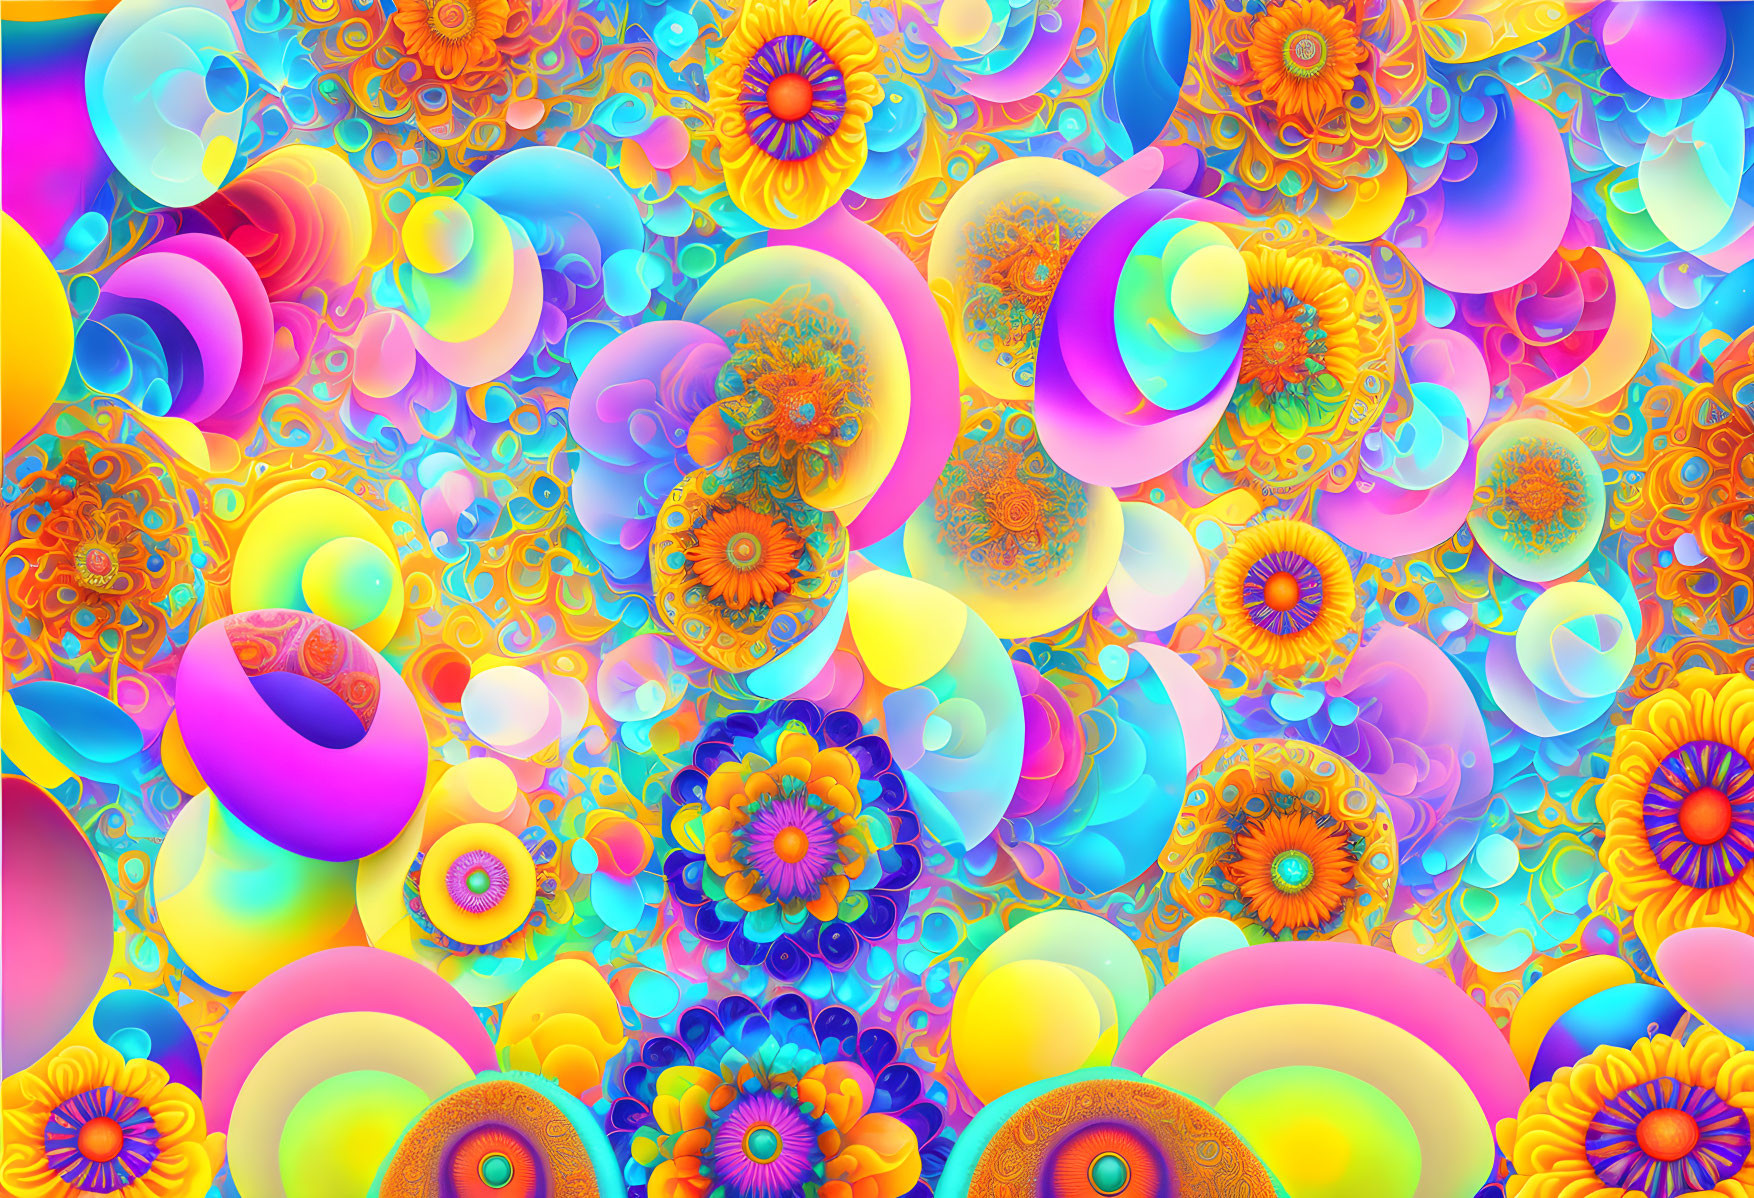 Colorful Fractal and Spiral Abstract Pattern